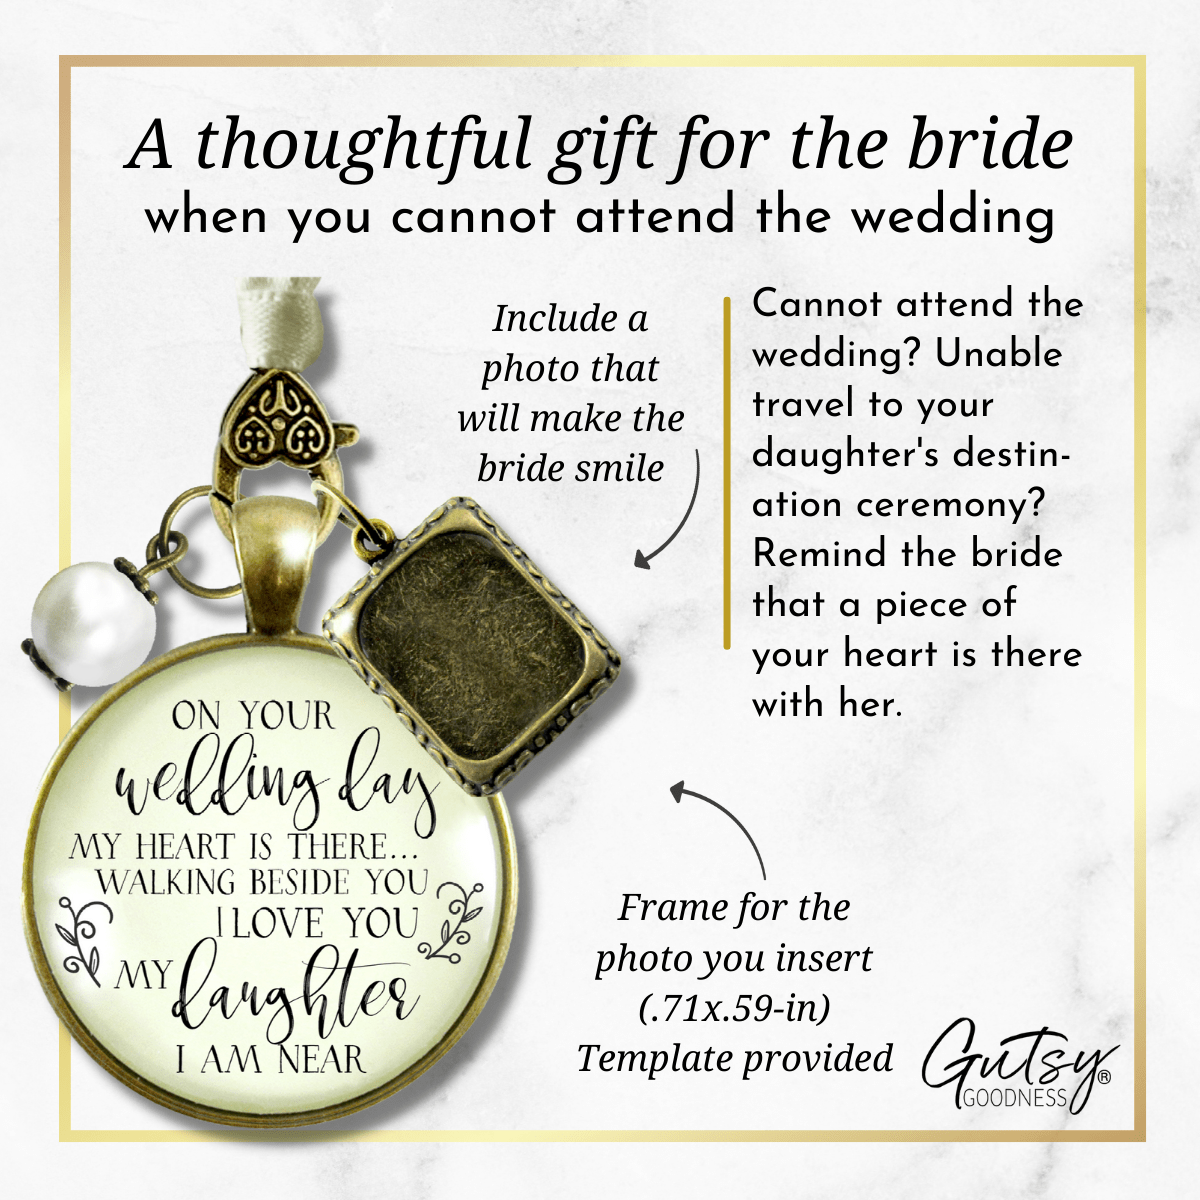 On Your Wedding Day MY Heart Is There Walking Beside You DAUGHTER - DESTINATION BRONZE - CREAM - WHITE BEAD